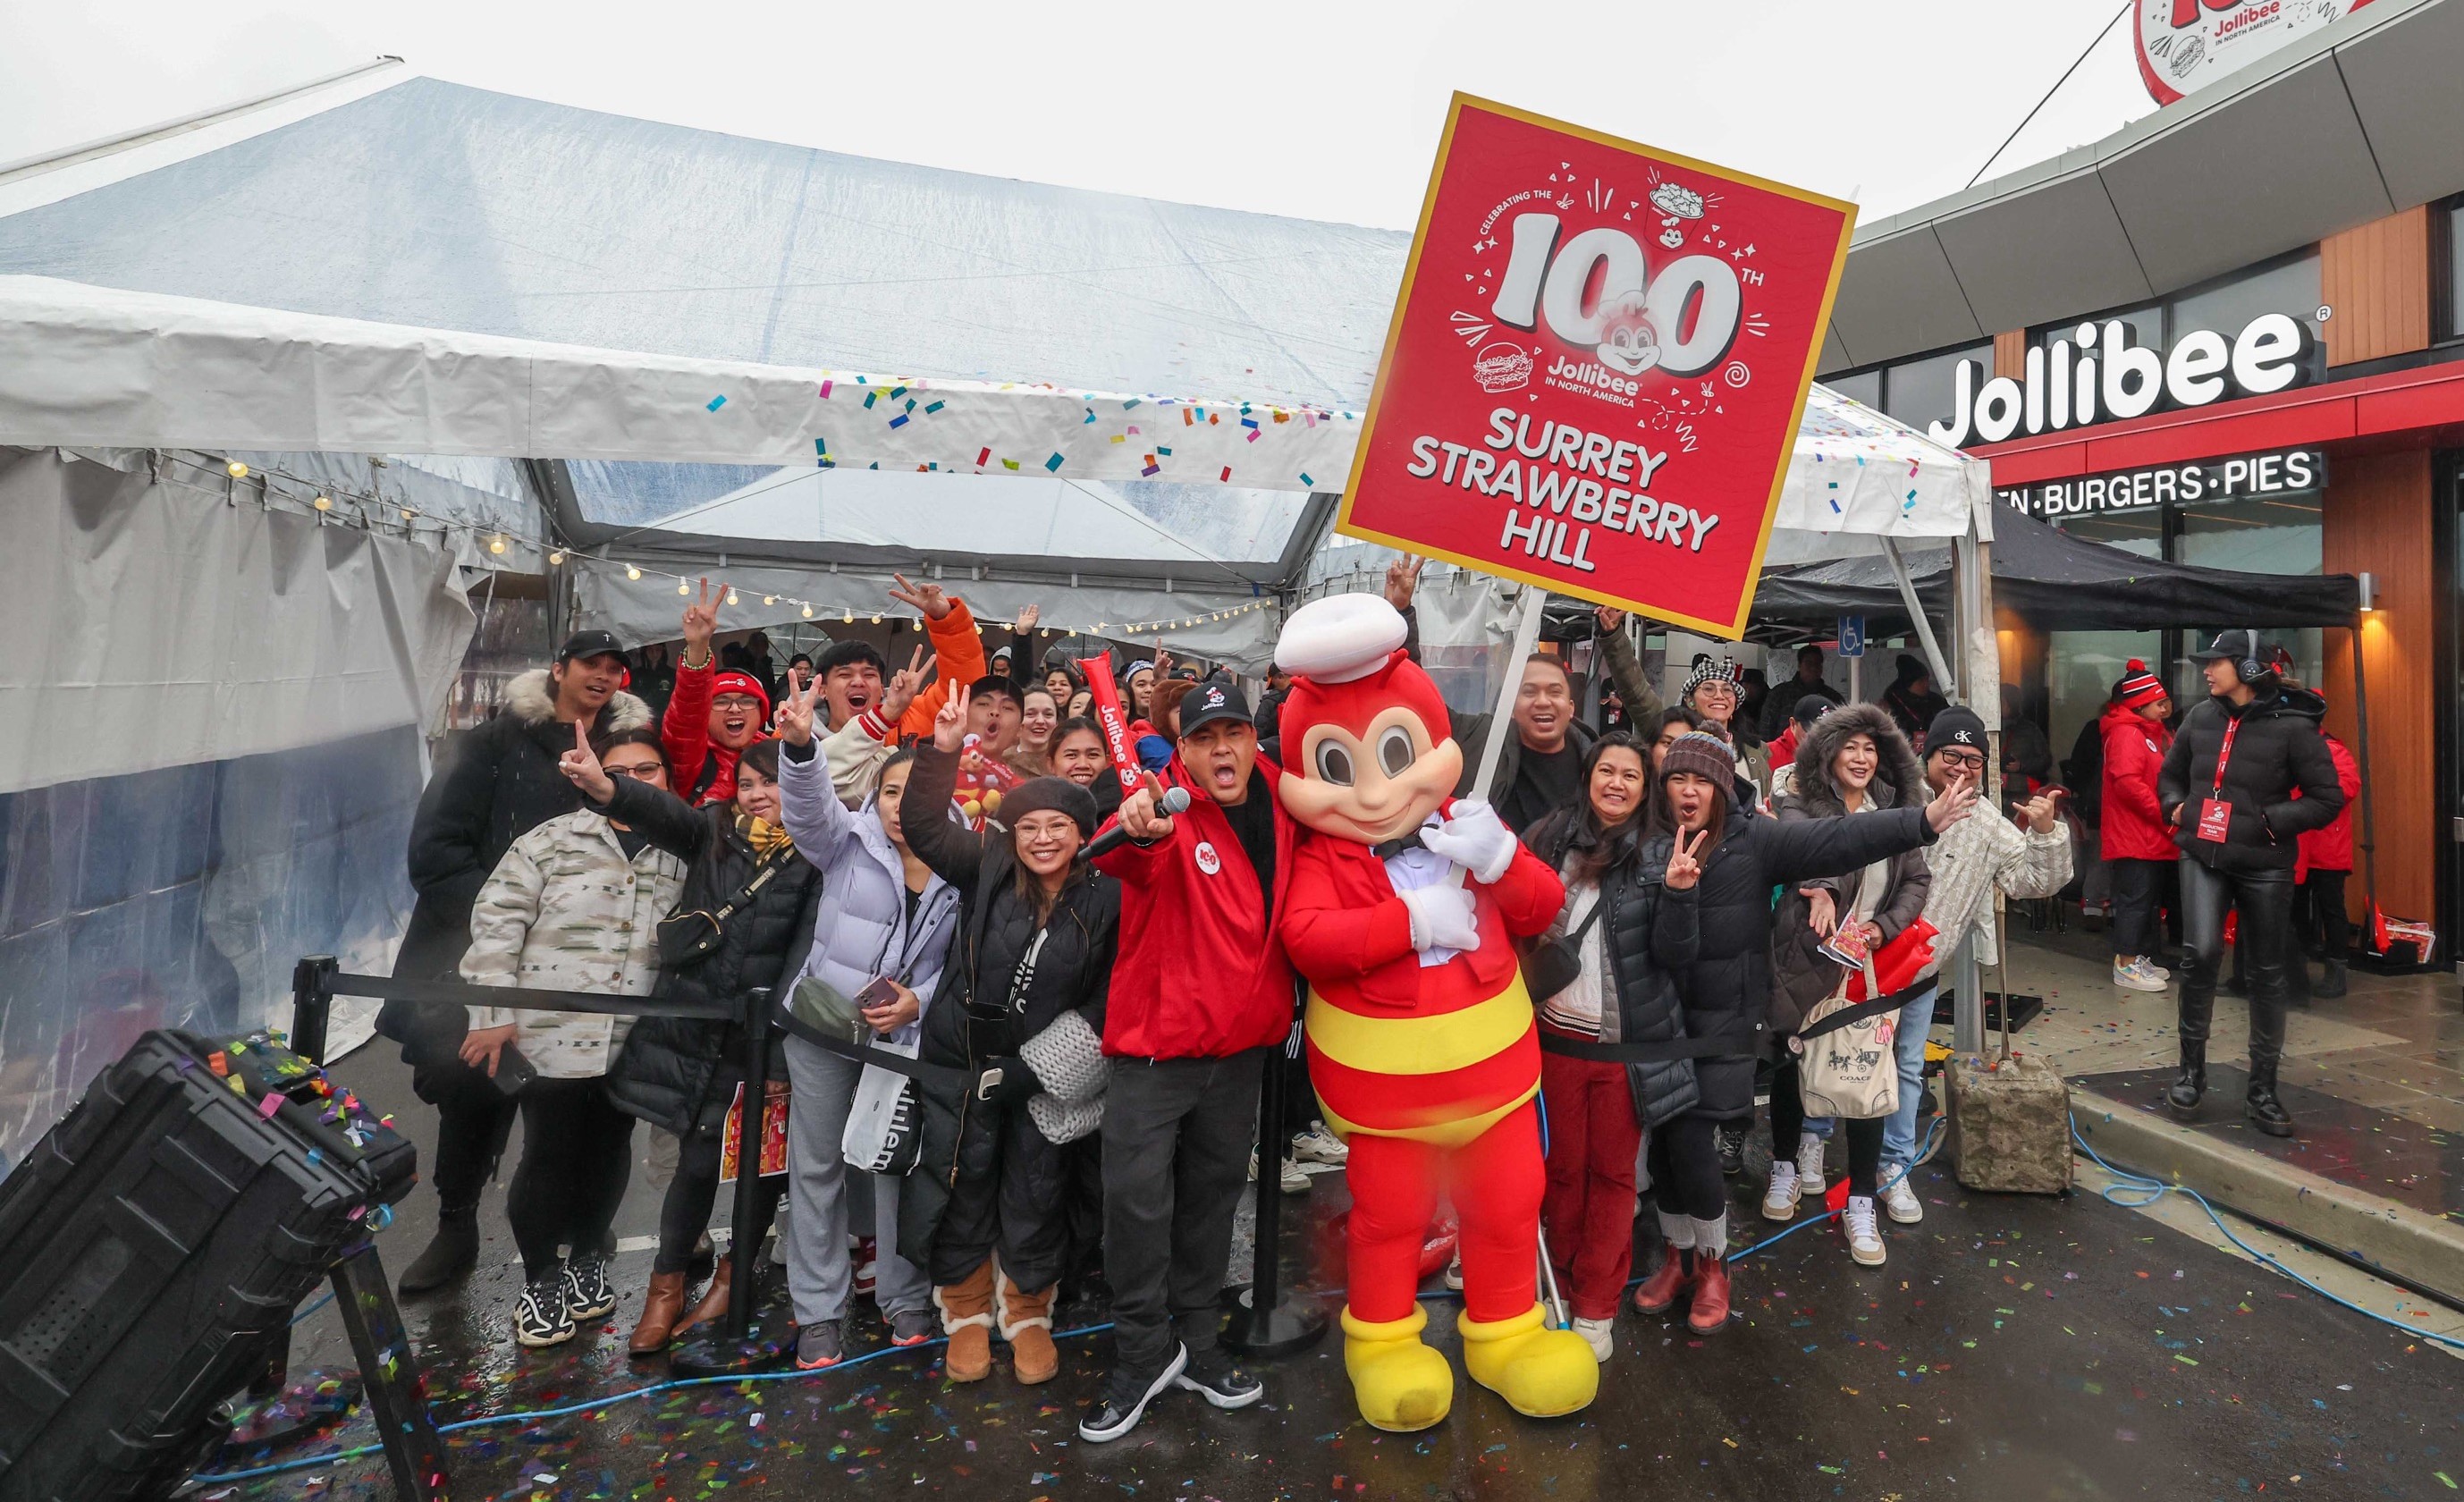 Sustained Growth. Jollibee is now present in 17 countries with 1,668 store locations – and counting. The recent milestone opening in Canada is the brand’s 100th store in North America and is part of the Jollibee Group’s aggressive growth plans for 2024.